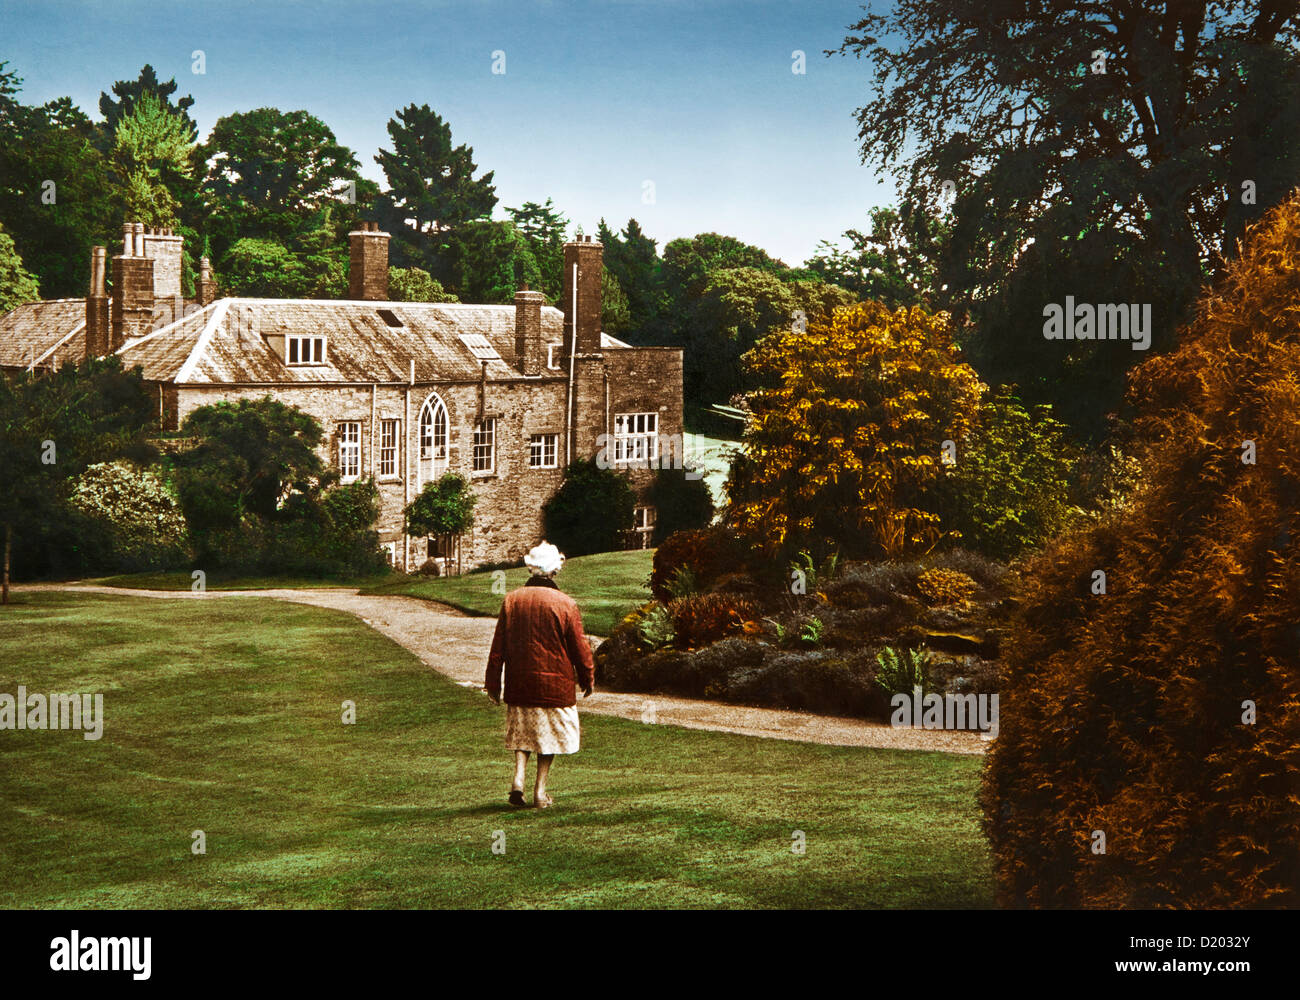 Old woman in front of manor house Prideaux Place, Padstow, Cornwall, Southern England, Great Britain, Europe Stock Photo